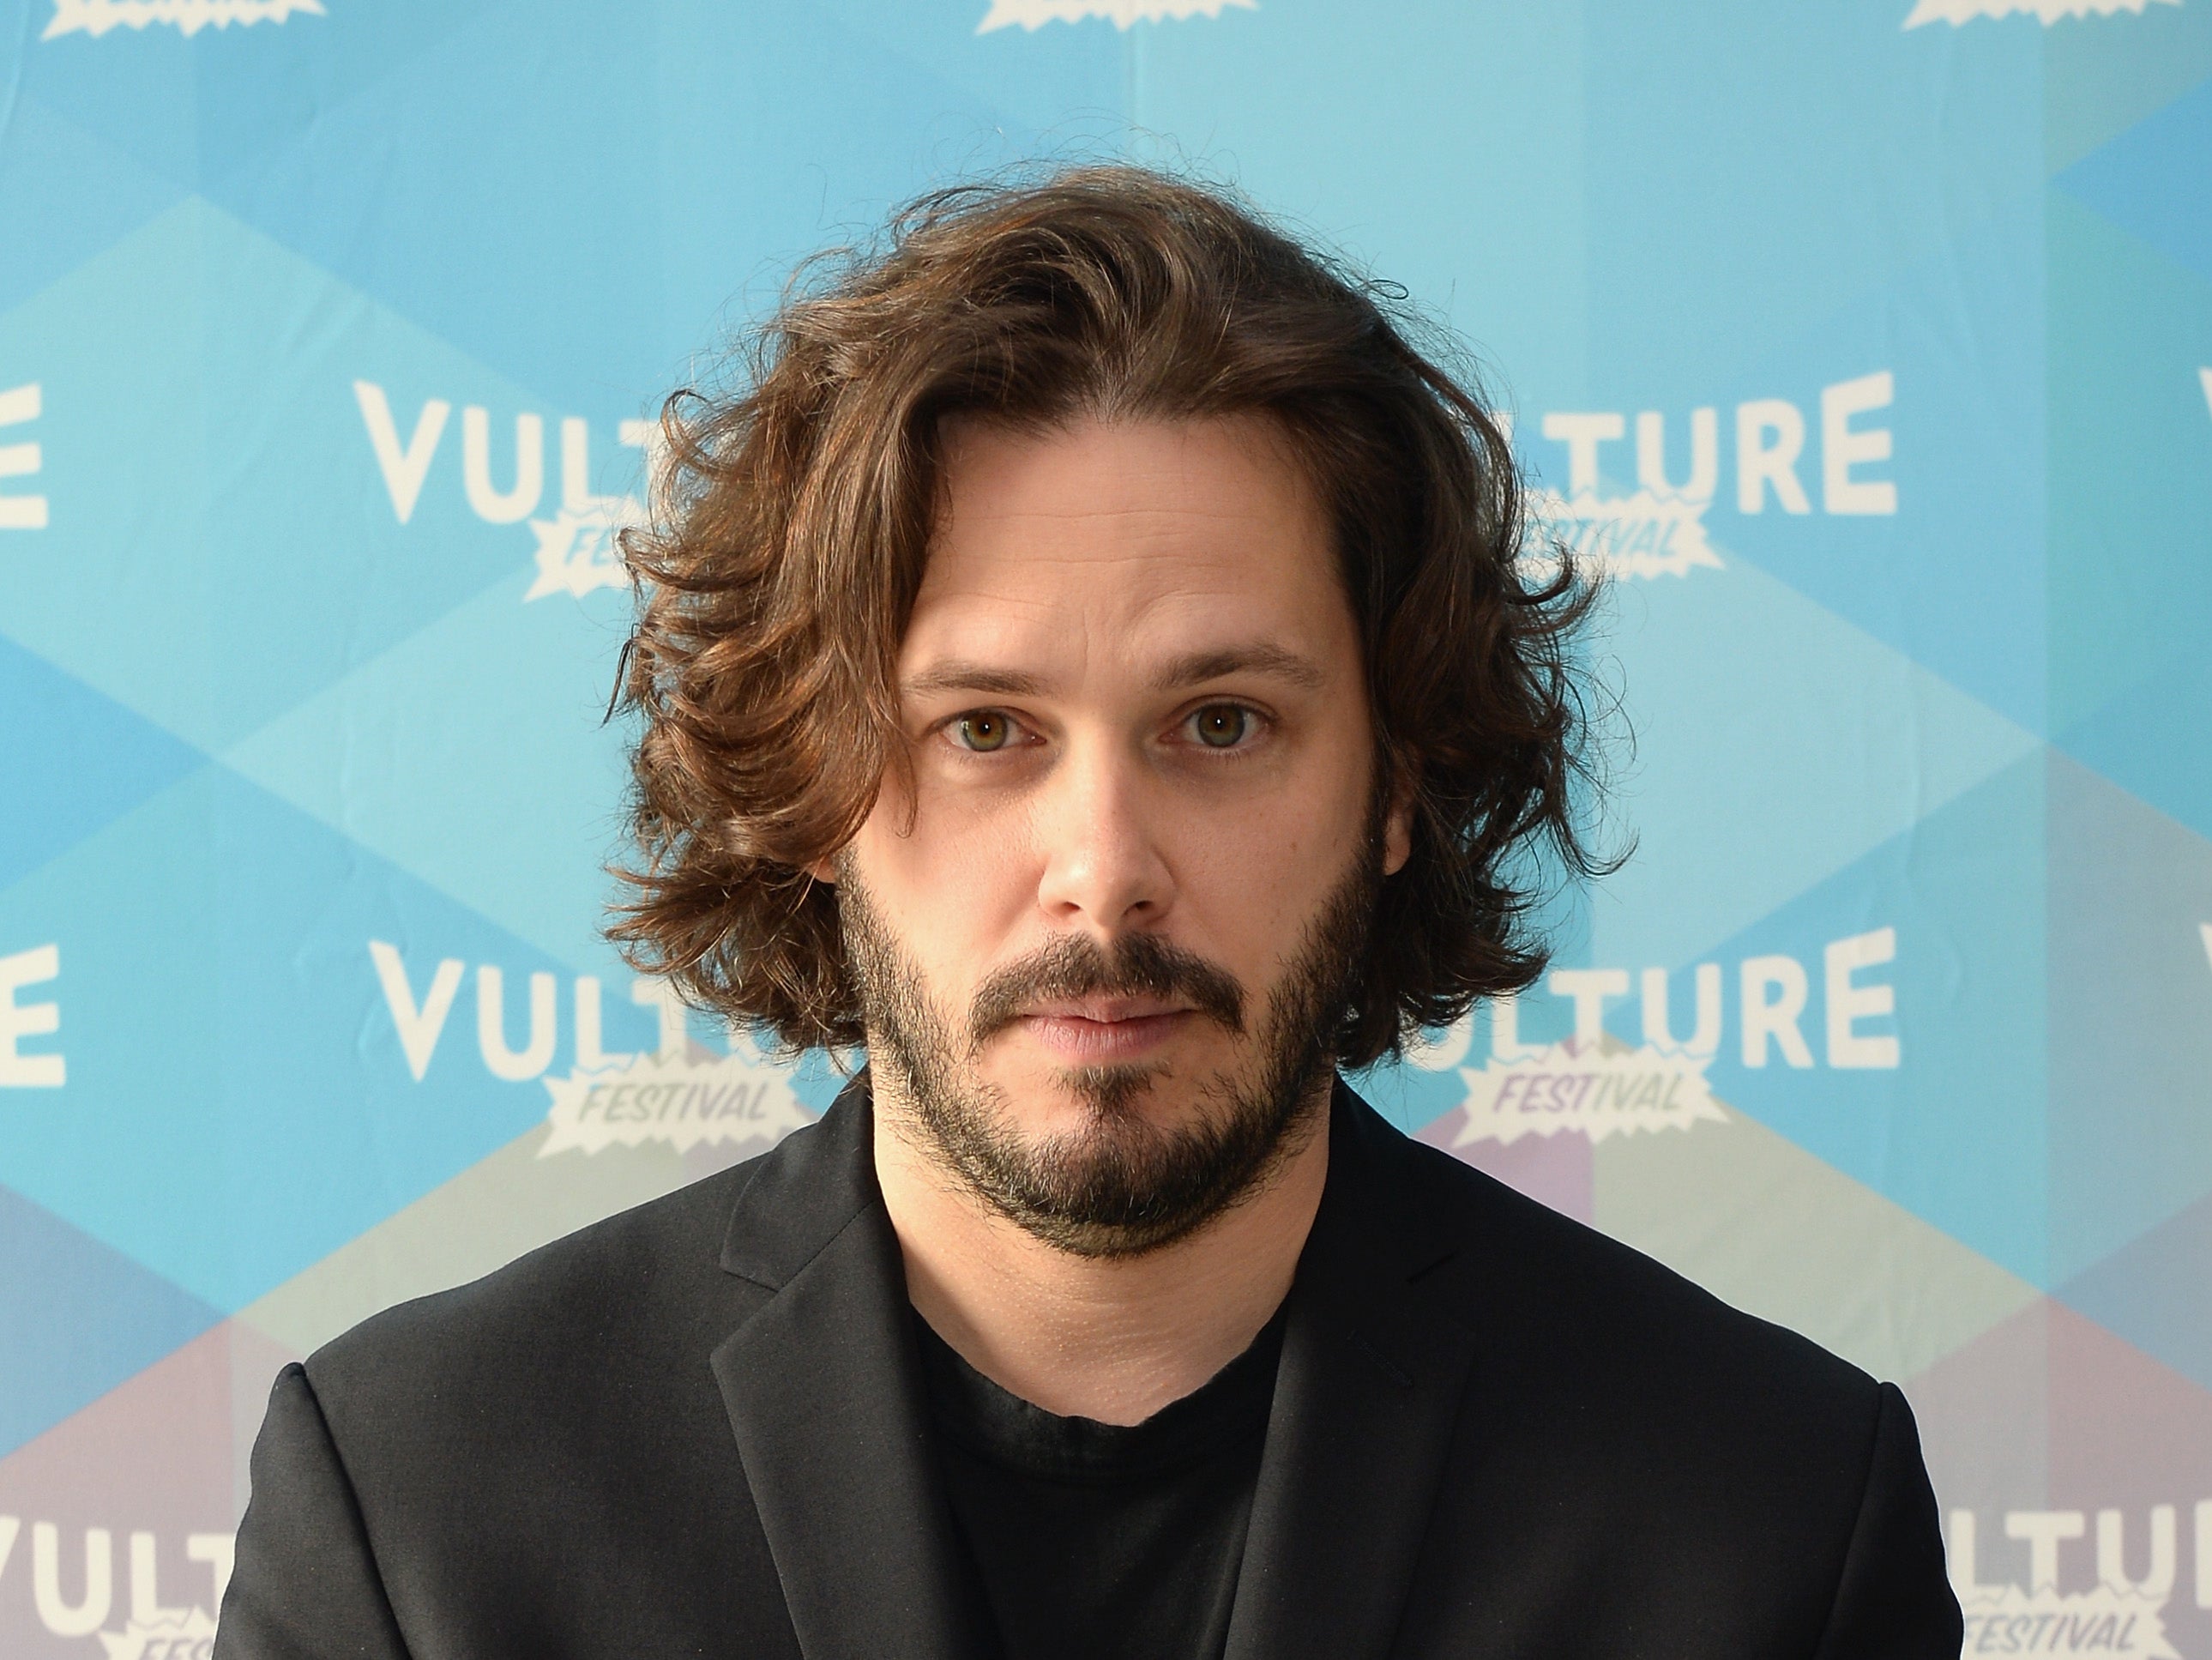 Edgar Wright was known to have quit ‘Ant-Man’ due to ‘creative differences’